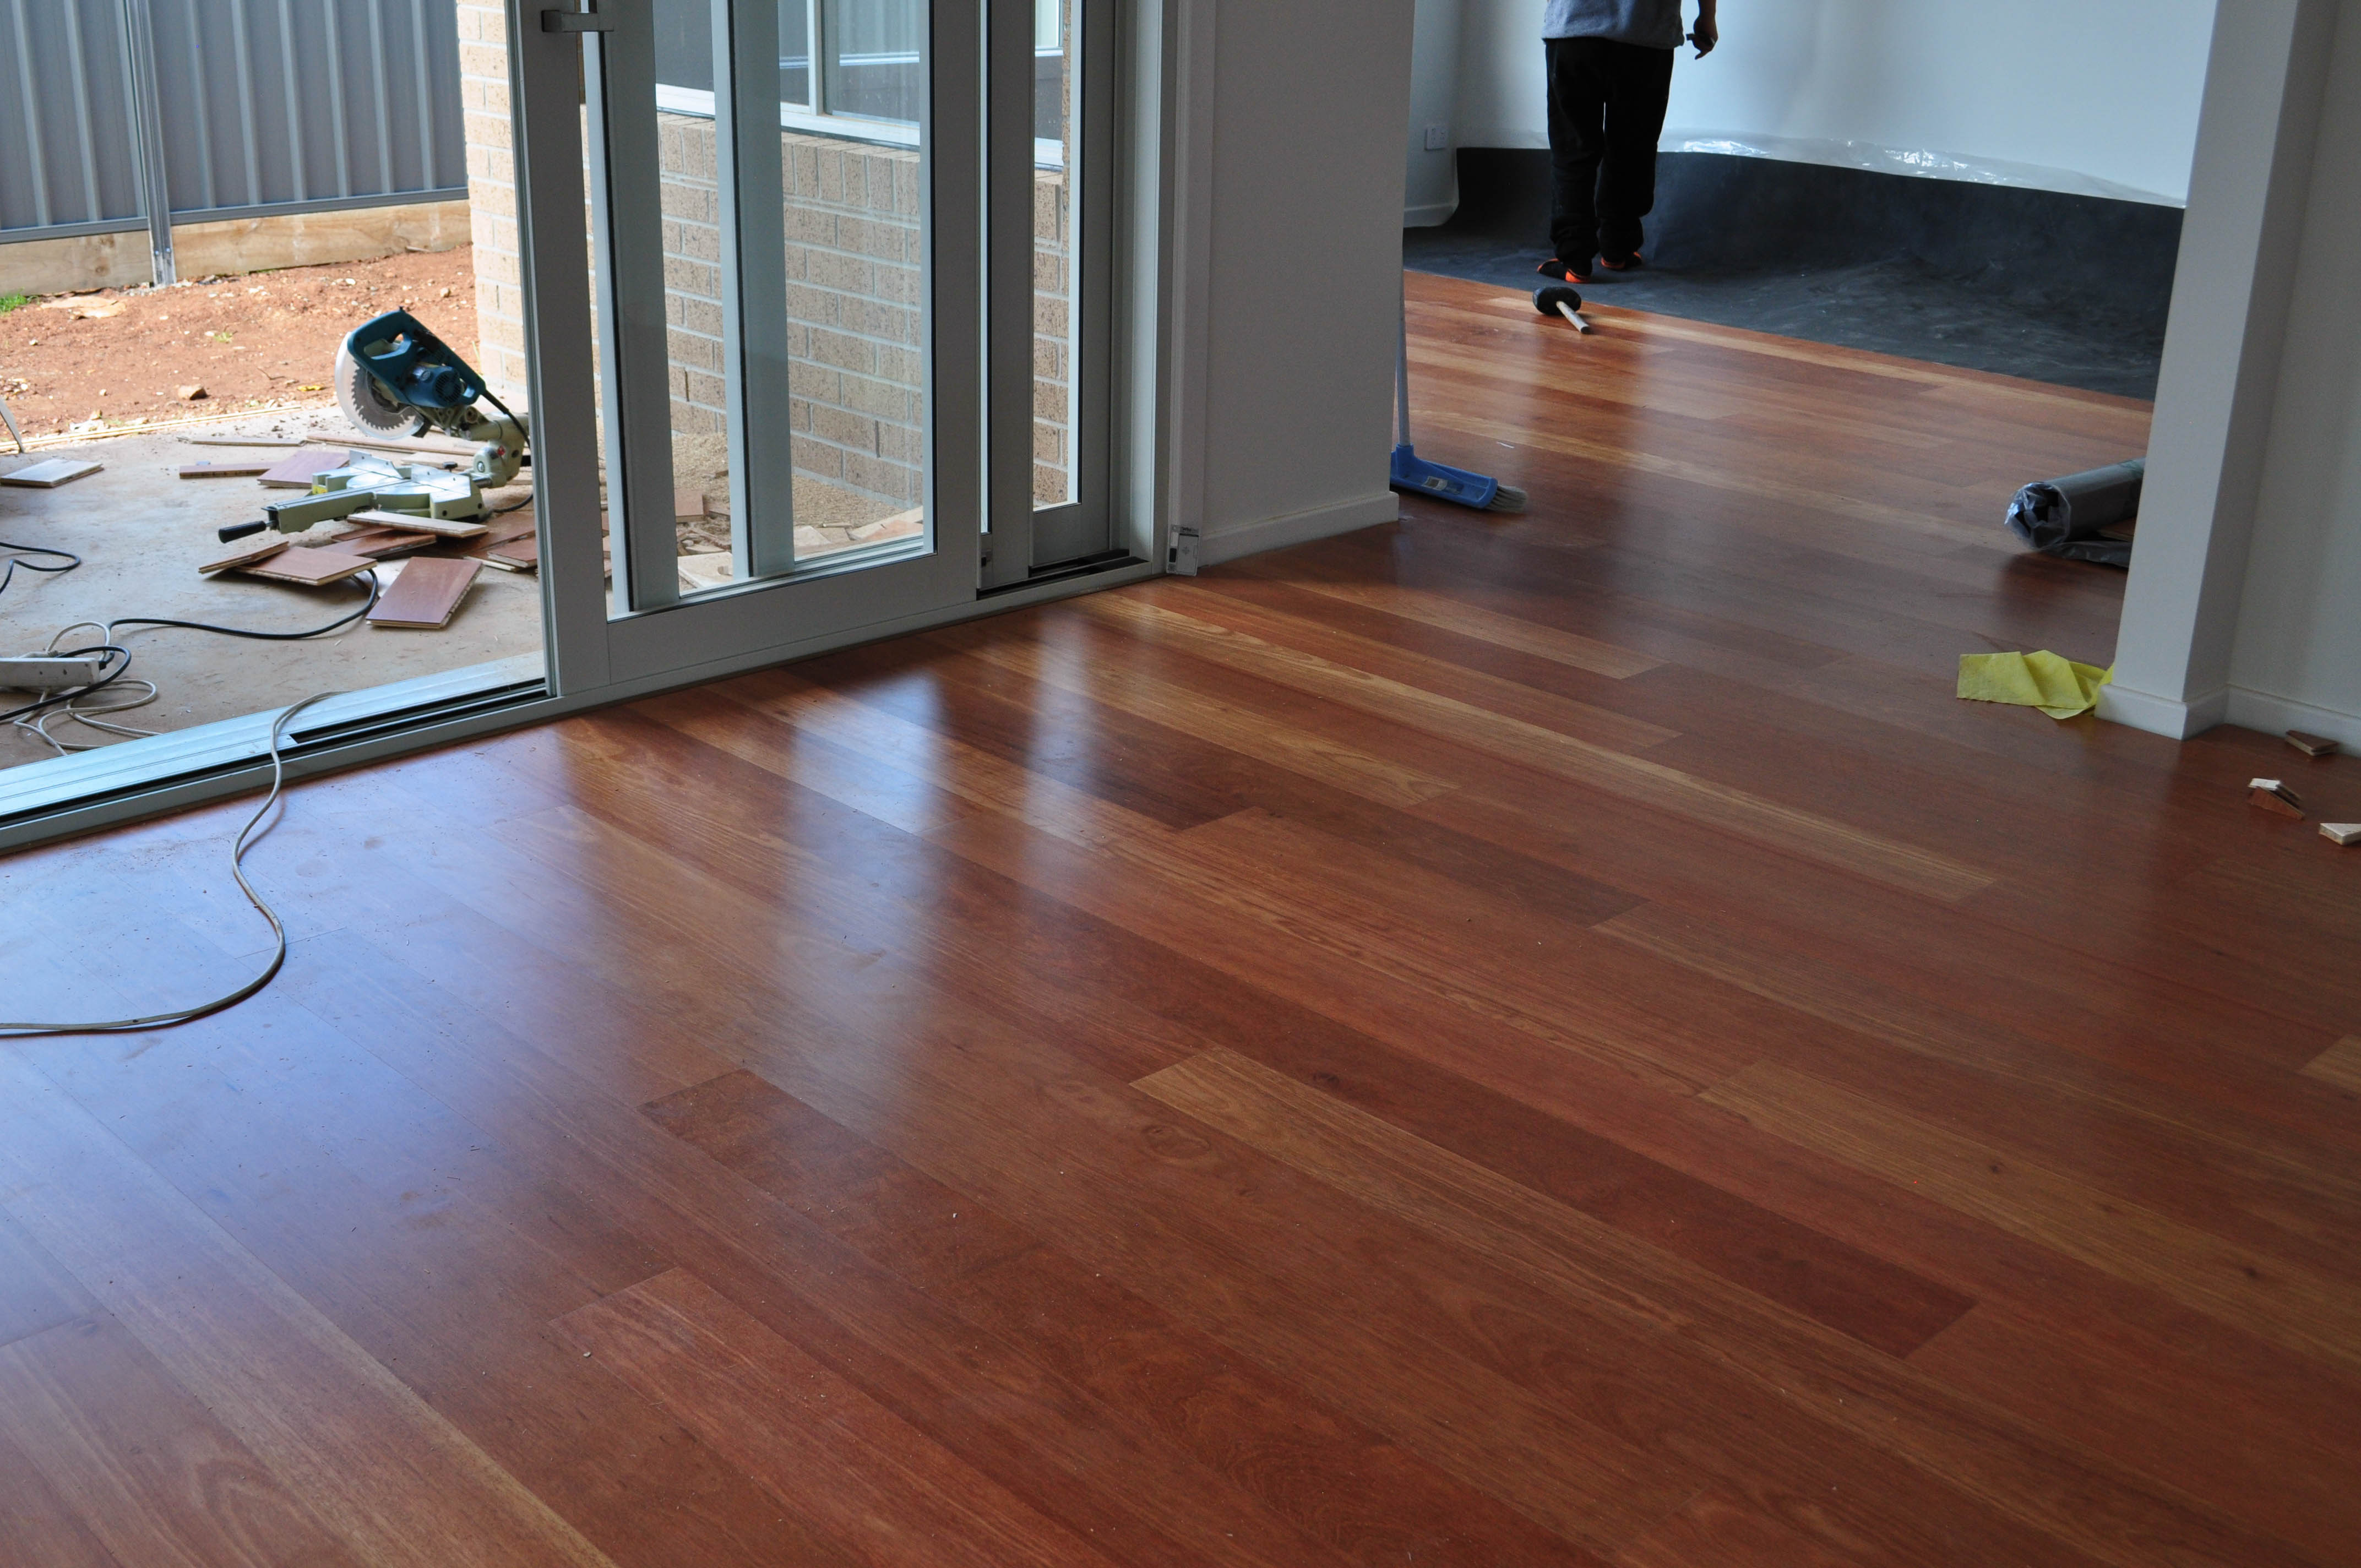 in two rooms, a newly installed orange colored engineered laminate flooring, in Melton, Victoria 3337, laid by Concord Floors.